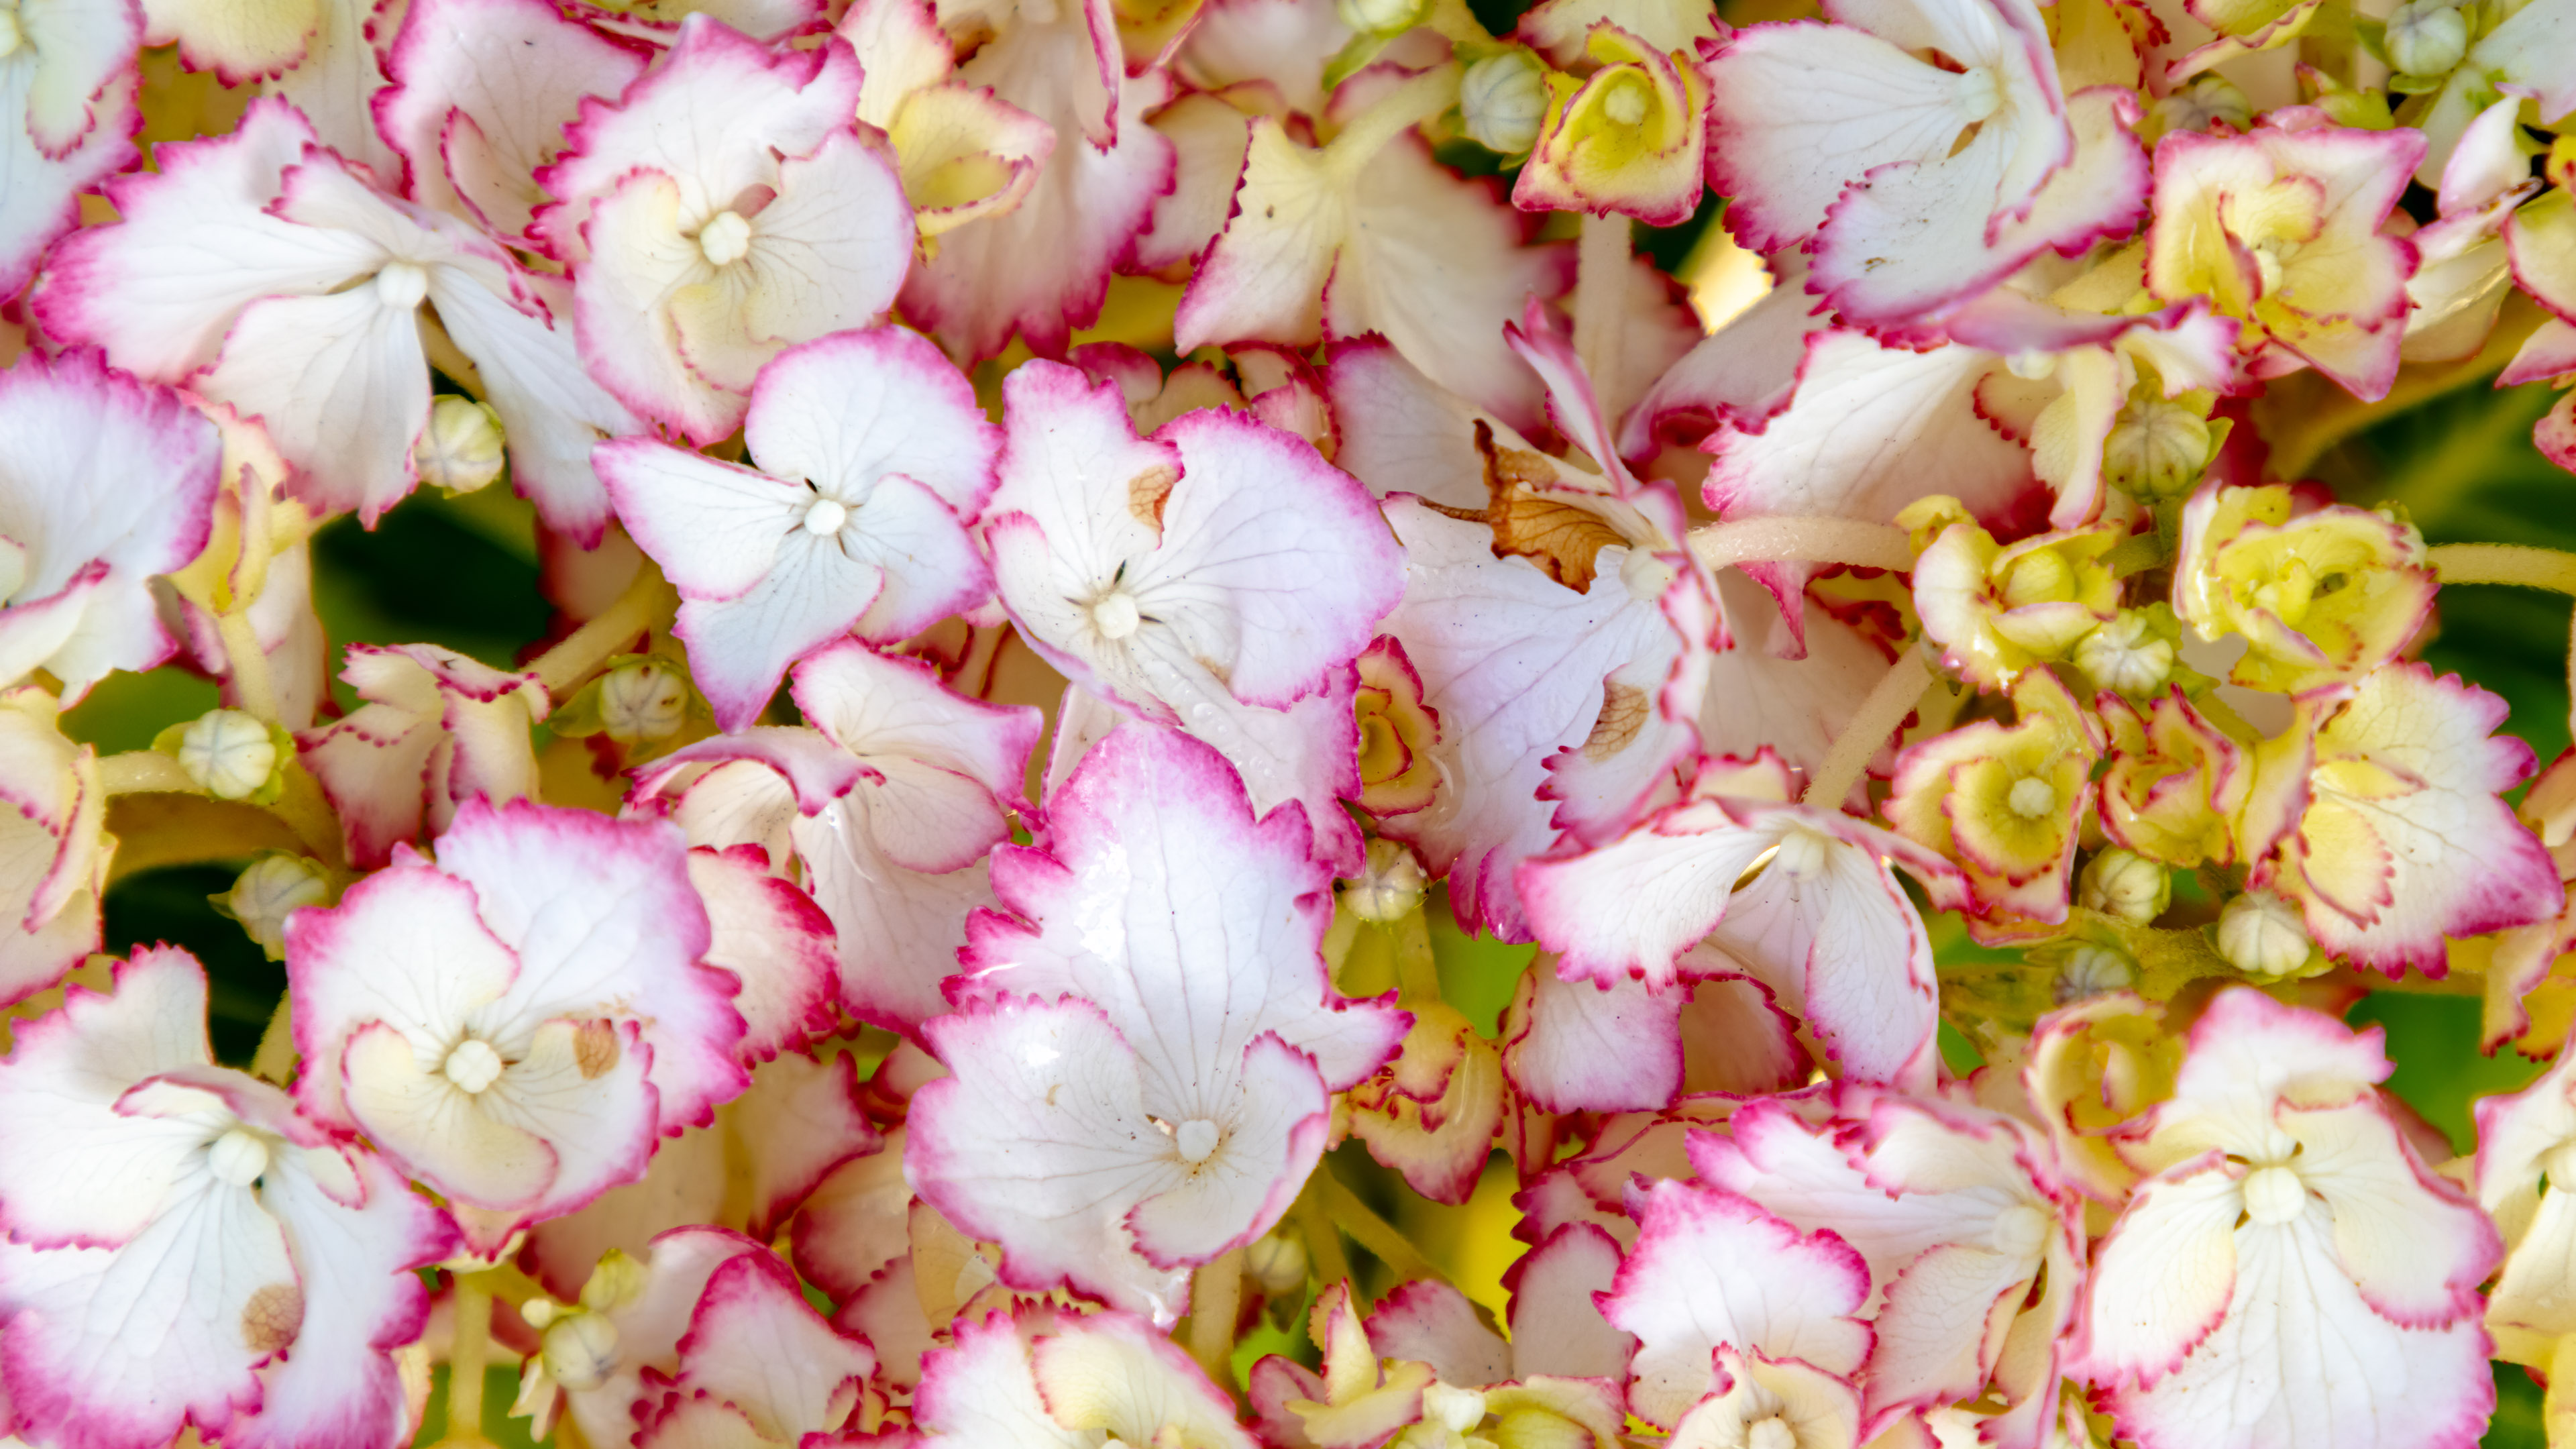 Indulge in the breathtaking details of our 2160p white and pink flowers wallpaper for an elevated desktop display.